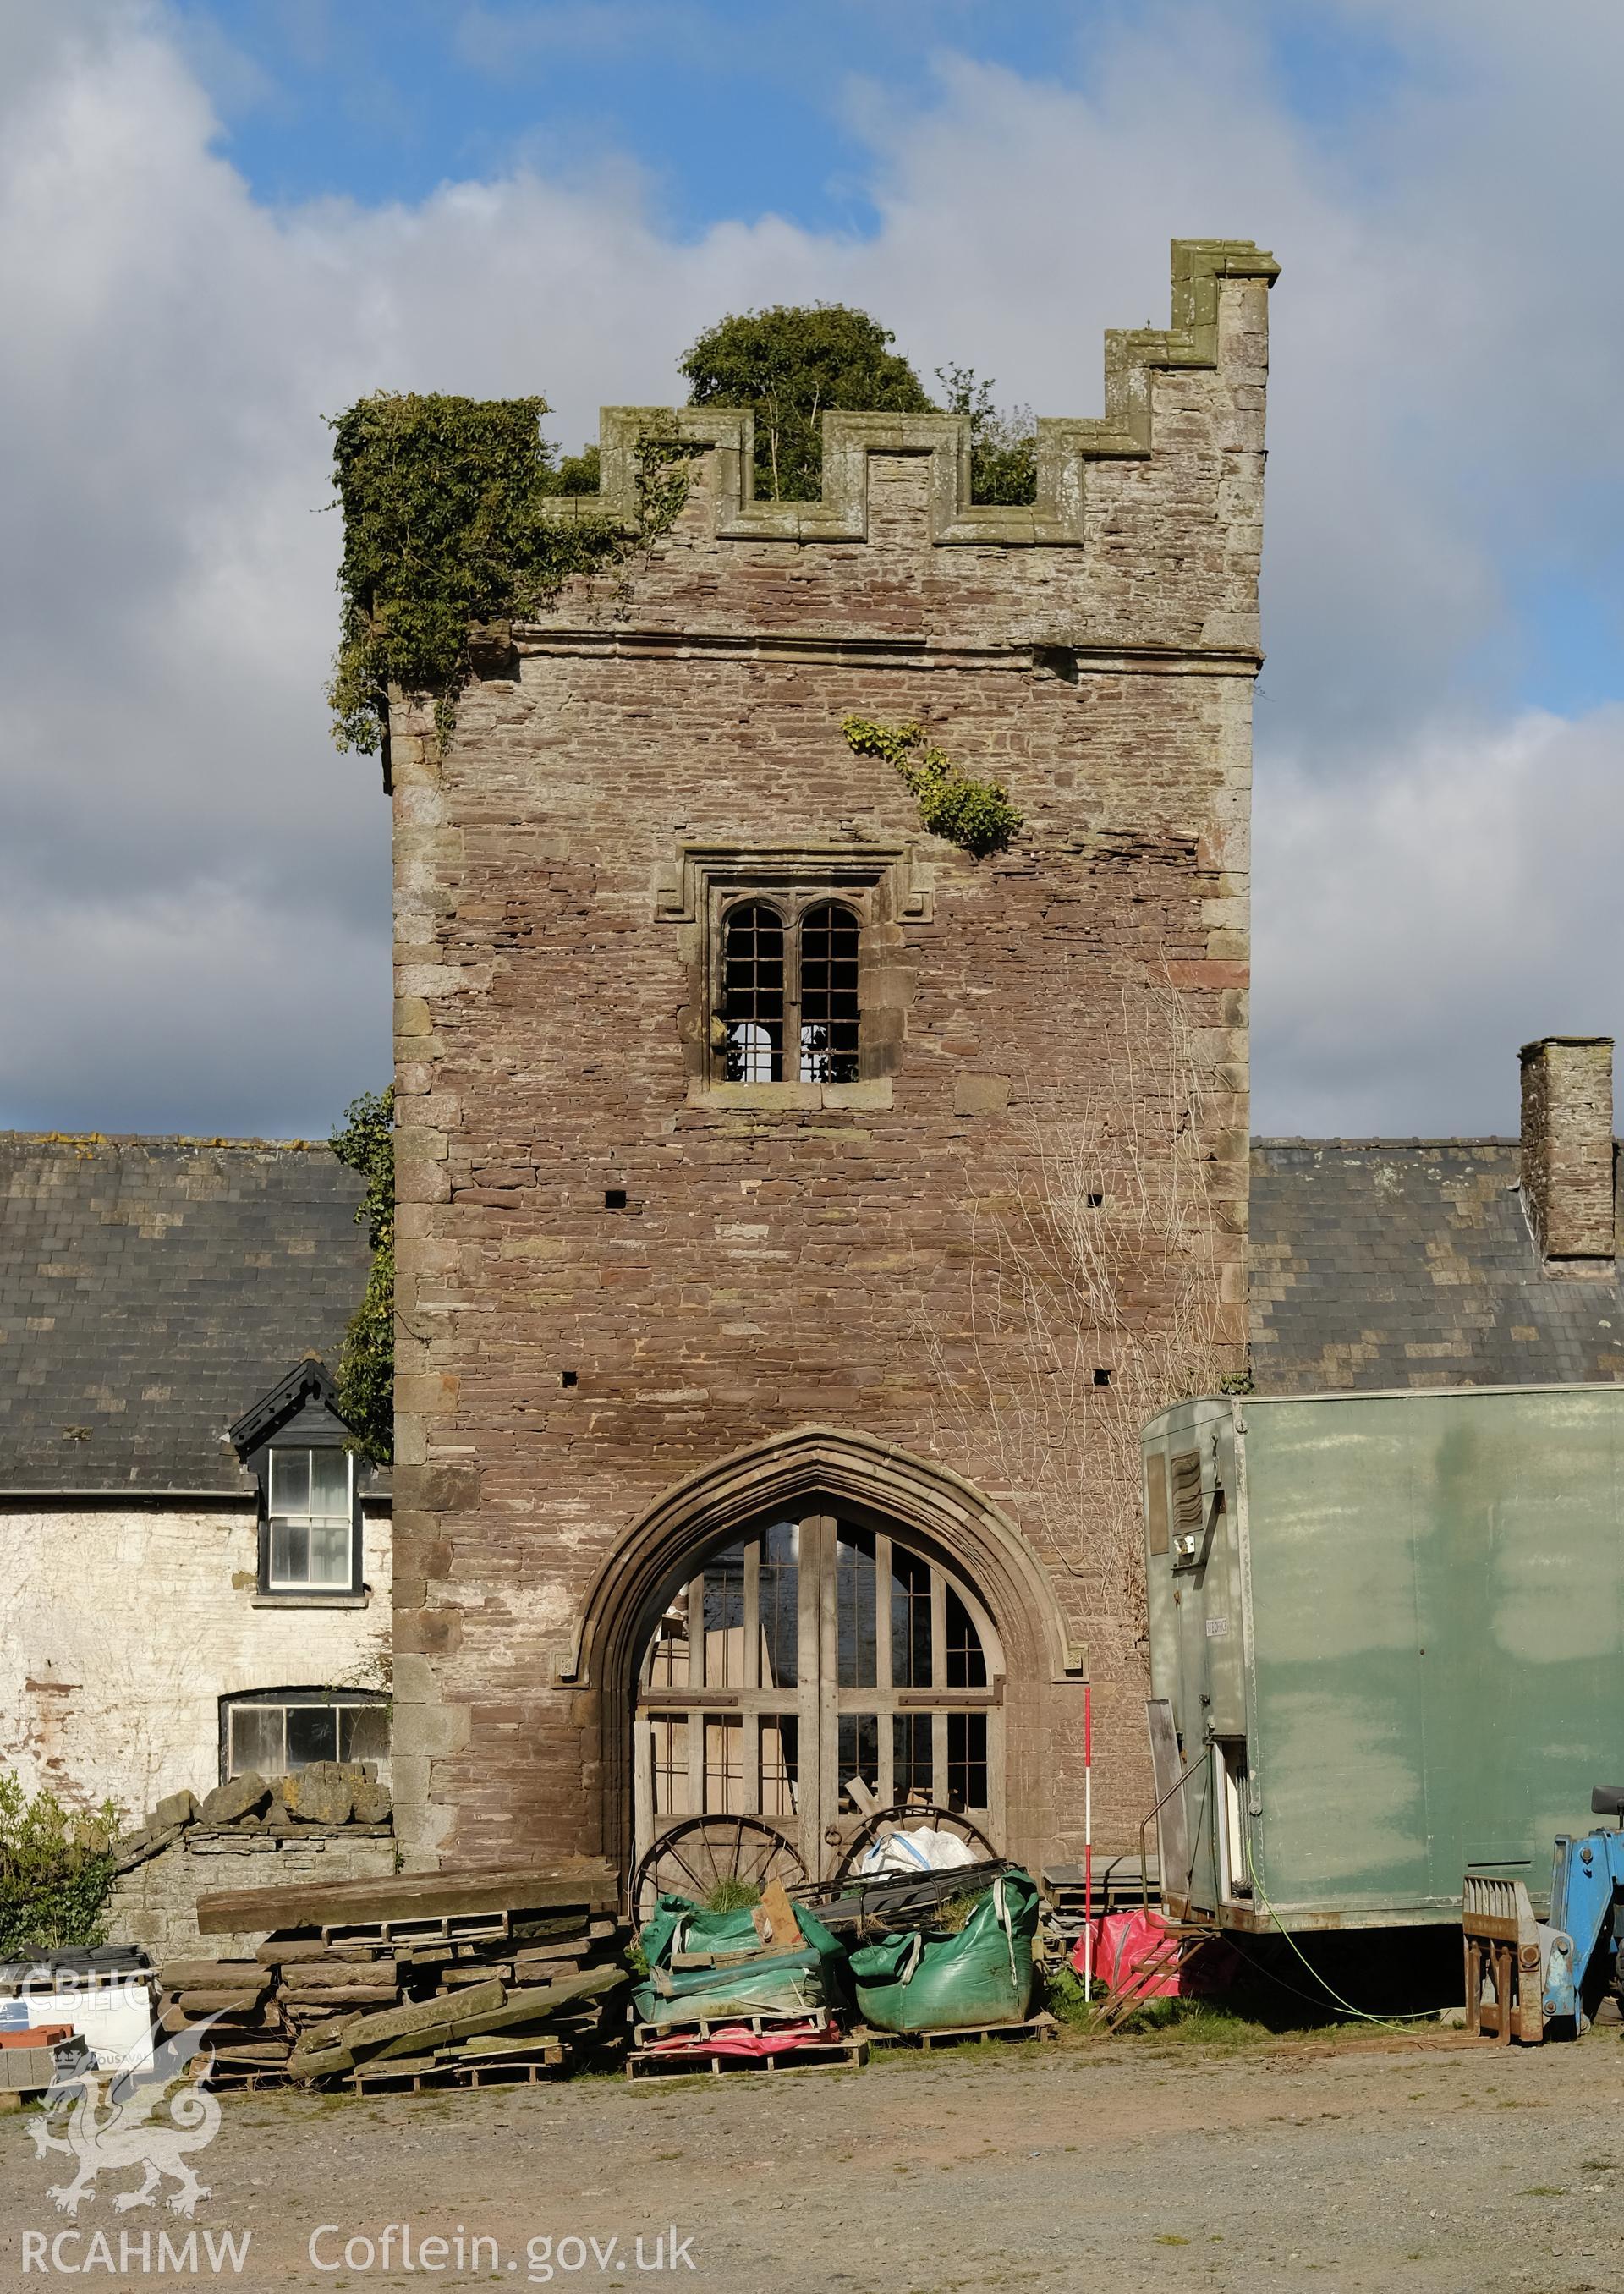 Colour photograph showing Great Porthmel Gatehouse - SE front, looking NW. Produced as part of Historic Building Recording for Great Porthamel Gatehouse, carried out by Richard Hayman, April 2021.